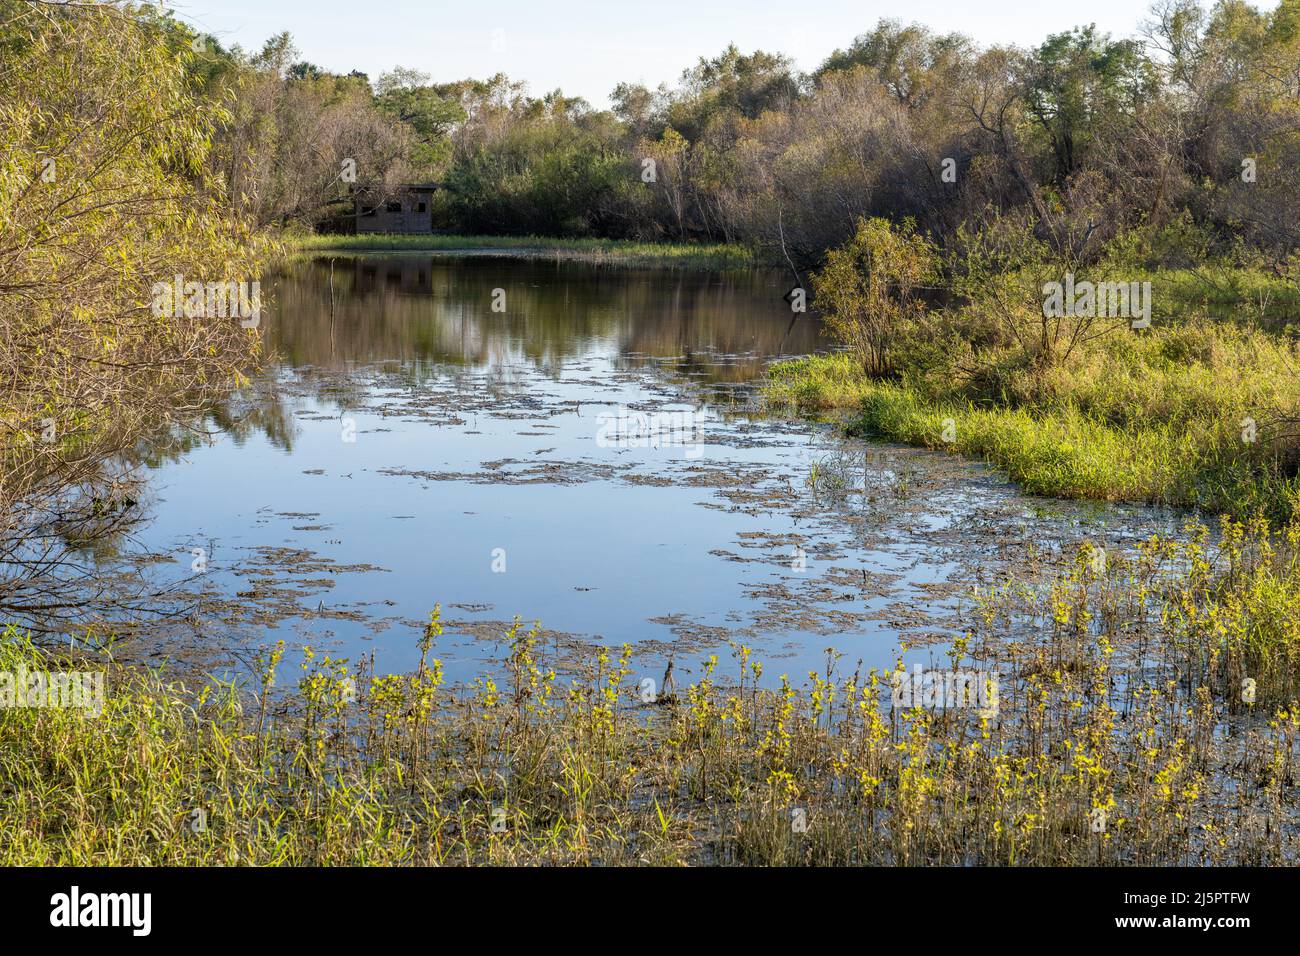 A resaca or oxbow lake and bird blind in the Sabal Palm Sanctuary, a nature reserve near Brownsville, Texas. Stock Photo